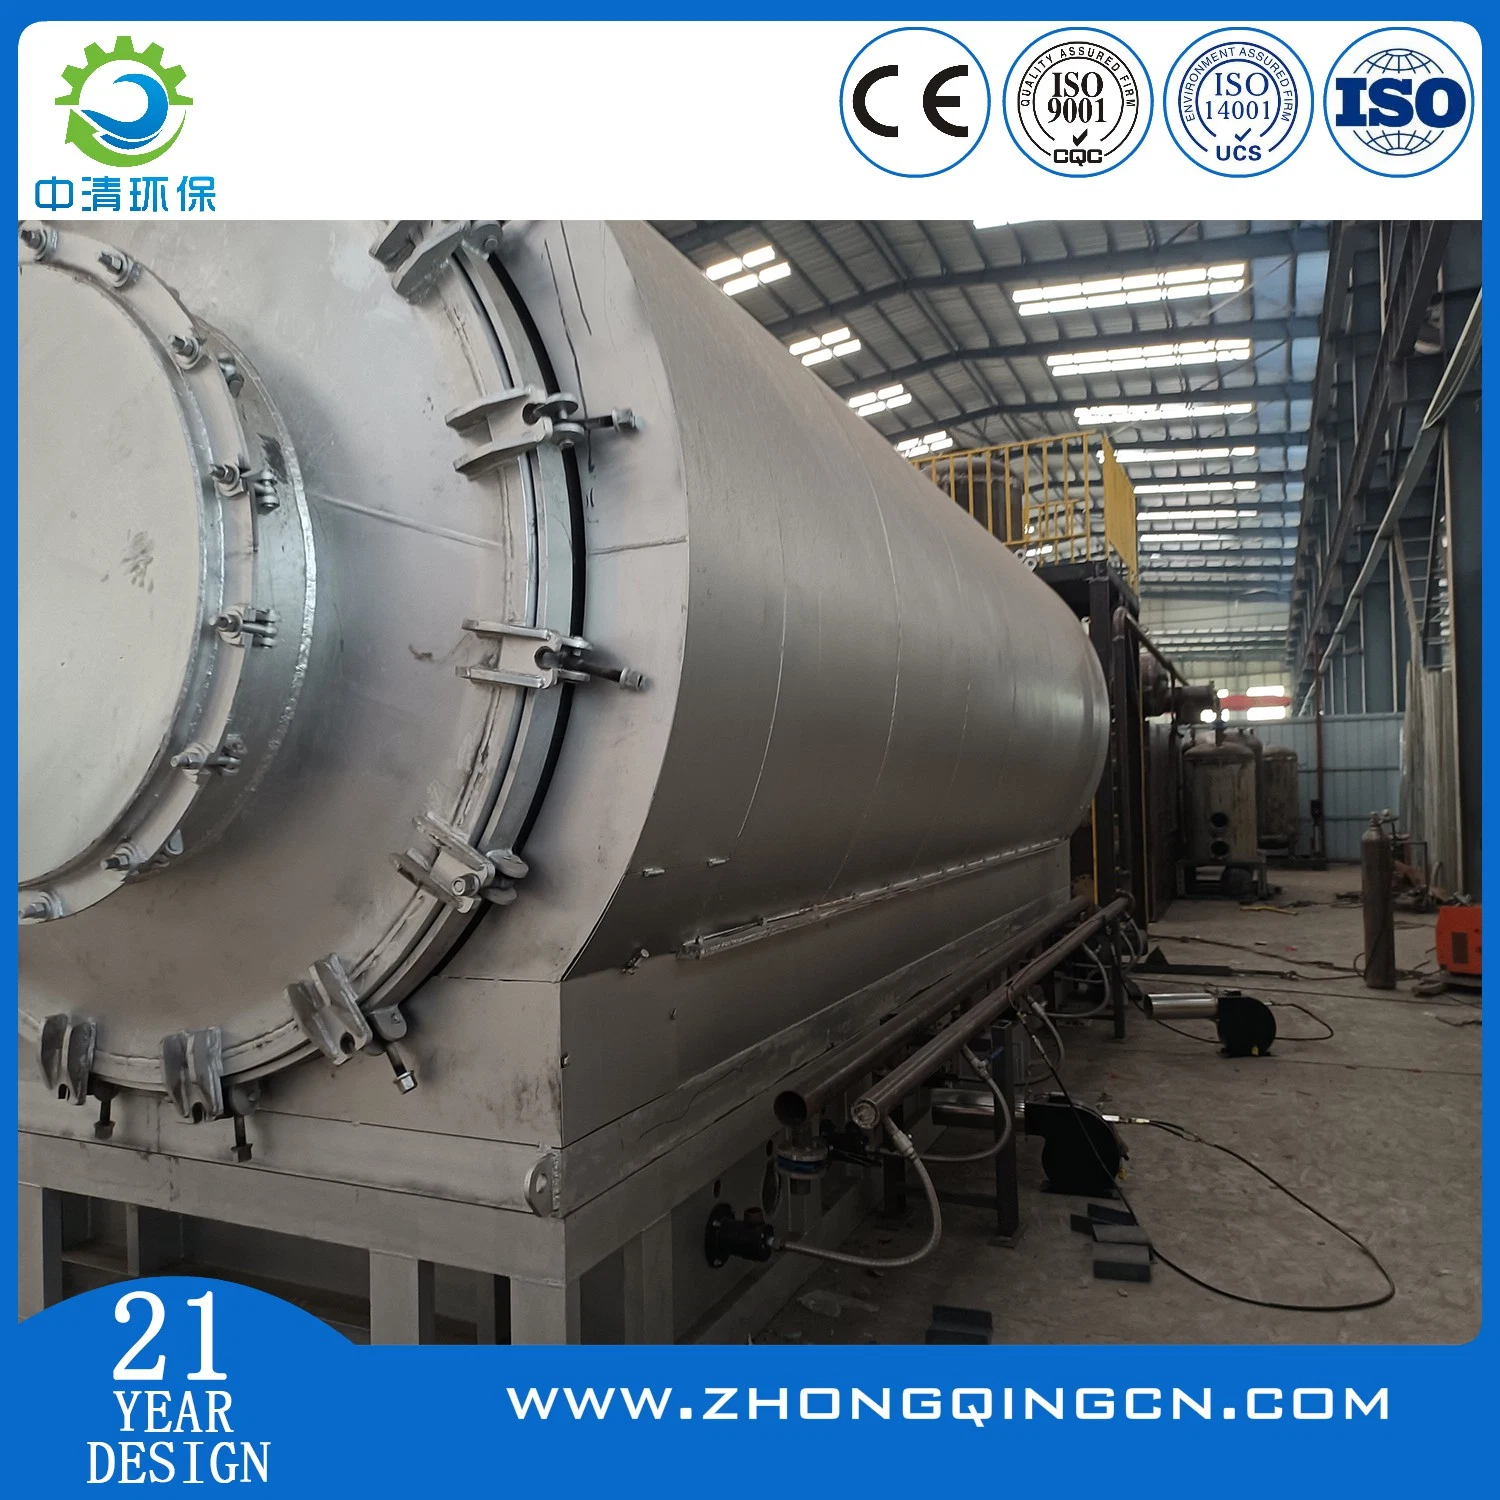 Waste Rubber/Solid Waste/Urban Waste/Municipal Waste Pyrolysis Equipment to Oil/Recycling Equipment to Oil with CE, SGS, ISO, TUV